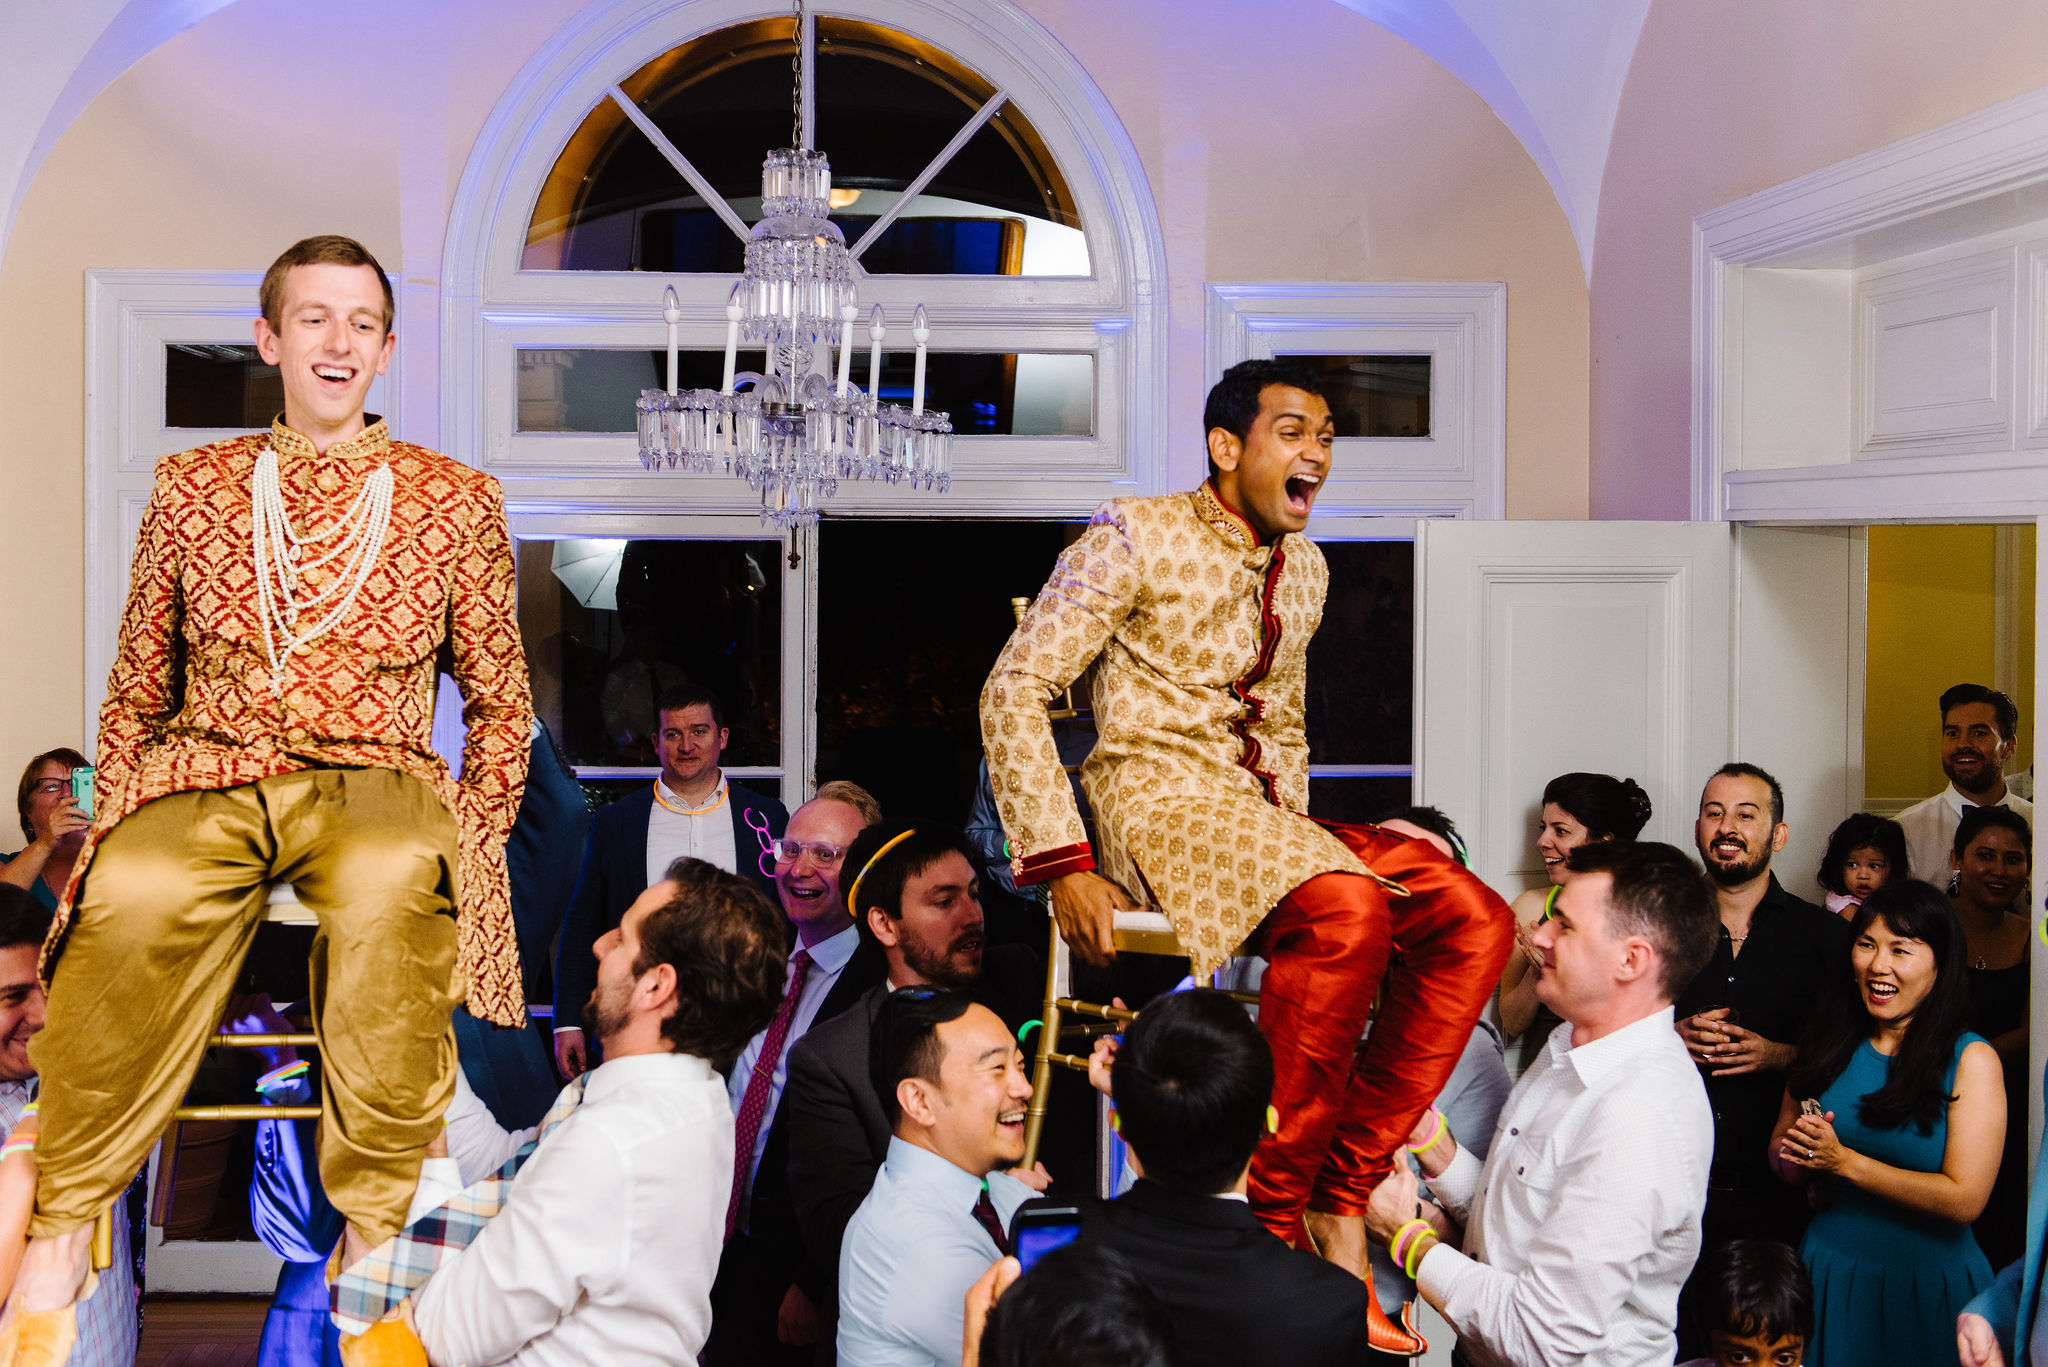 Two men are lifted up on chairs during their wedding reception